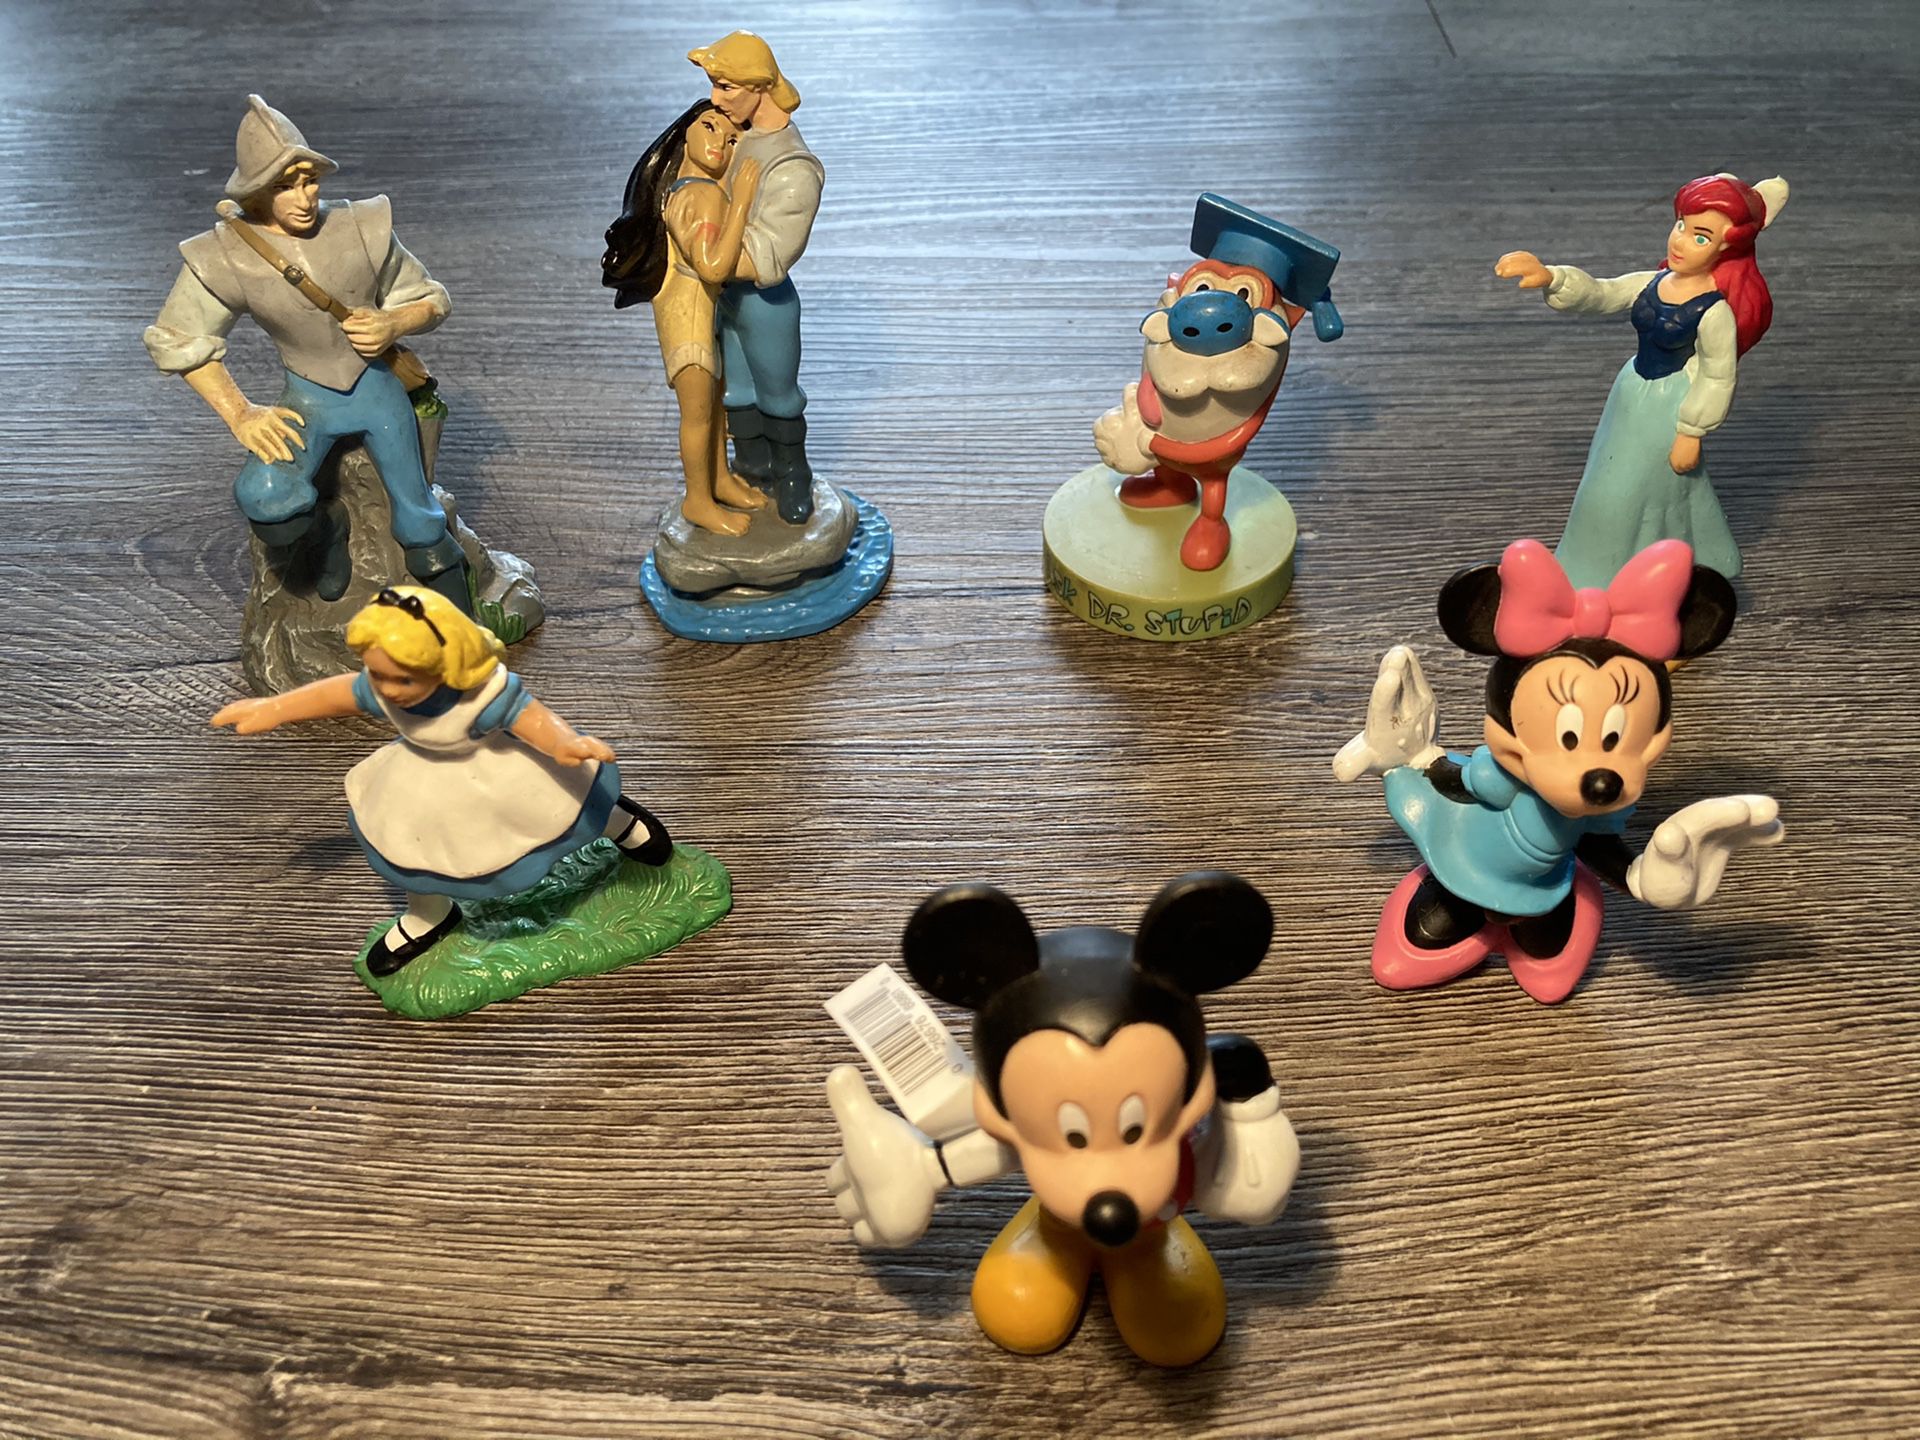 Rare vintage Disney and Nickelodeon figurines - 80s and 90s